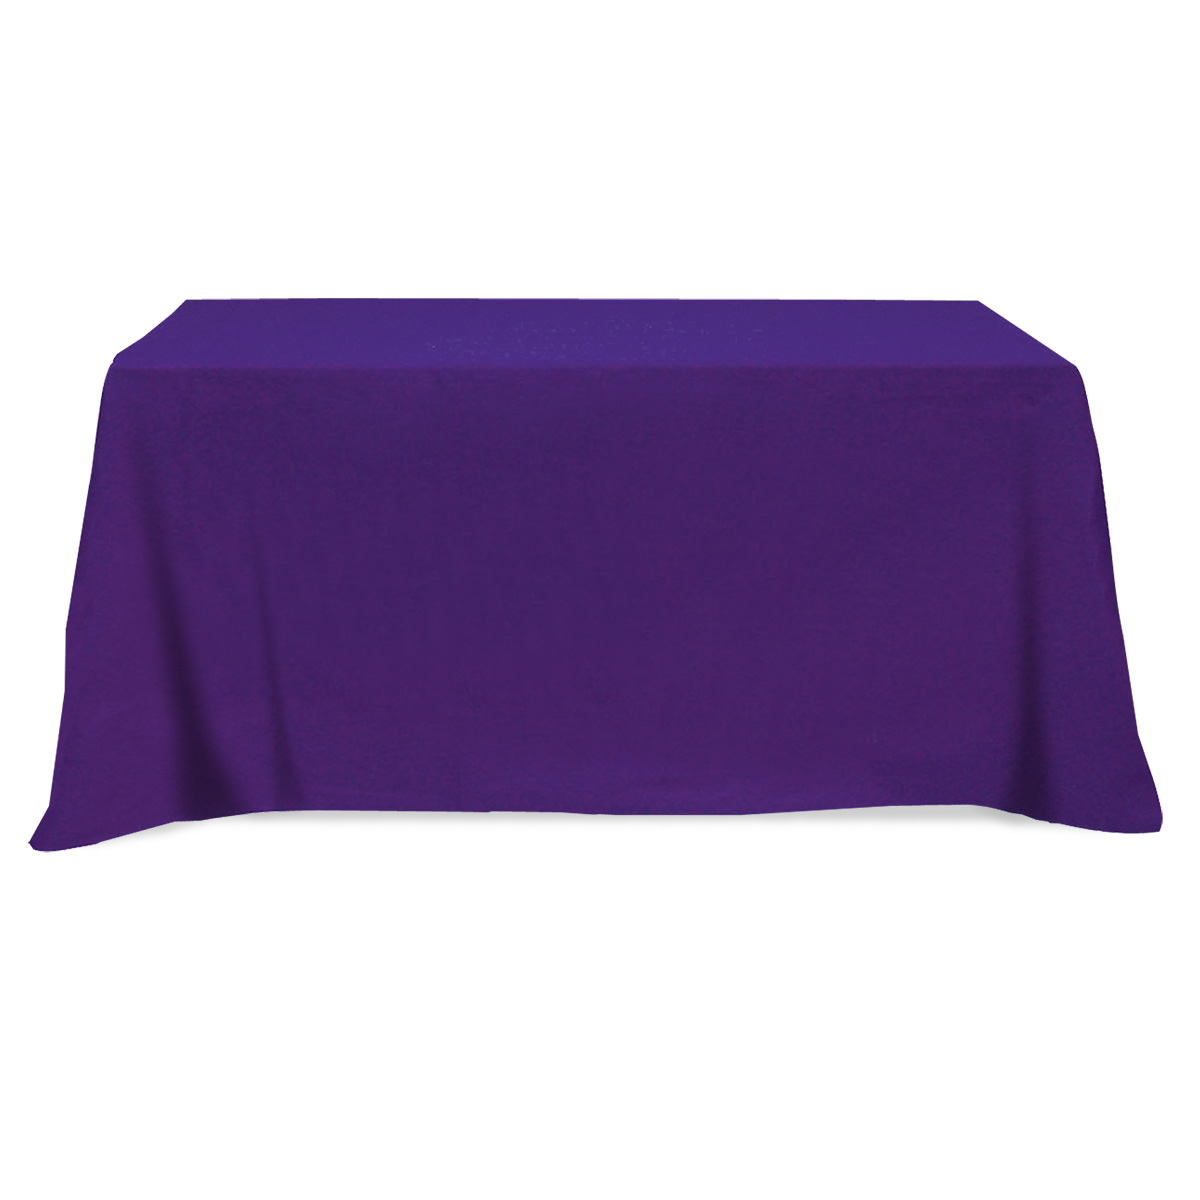 Printed Flat Poly/Cotton 4-Sided Table Cover